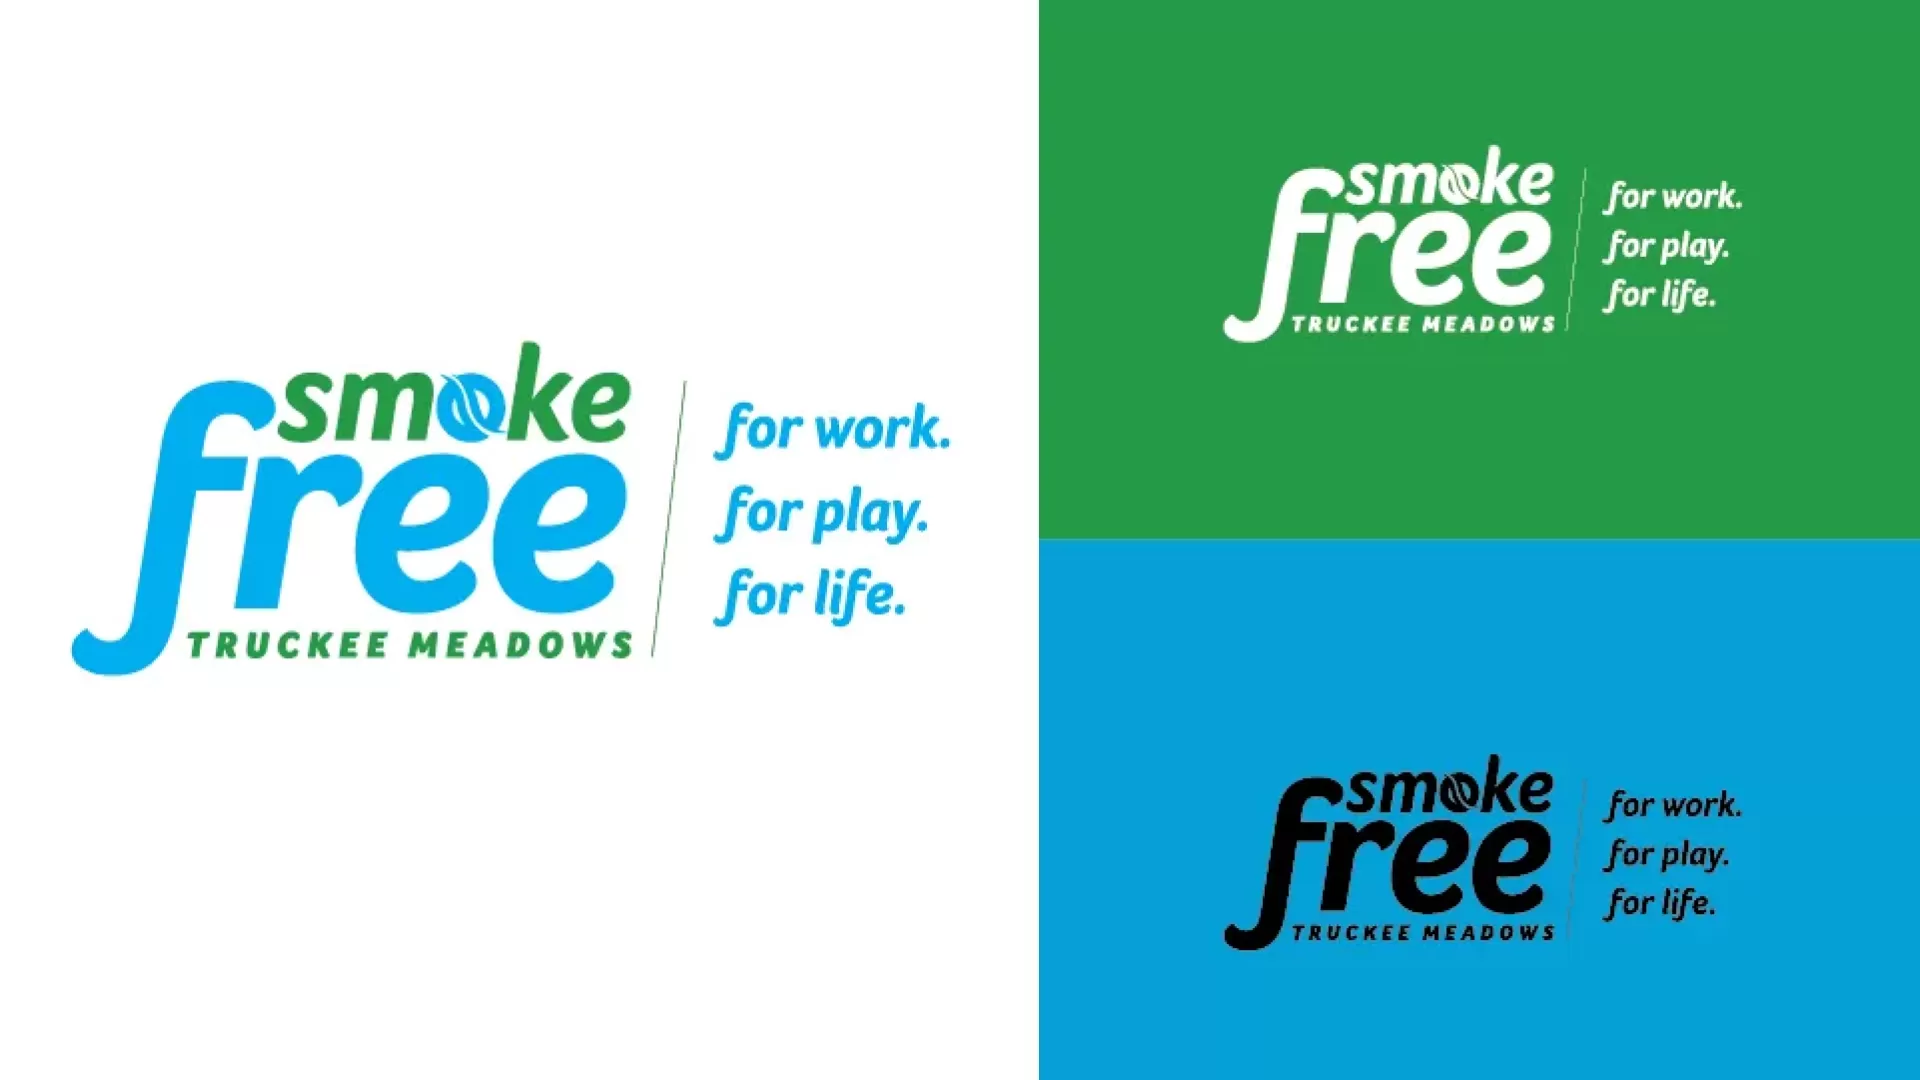 Smoke Free Truckee Meadows logo mockup on white, green and blue background